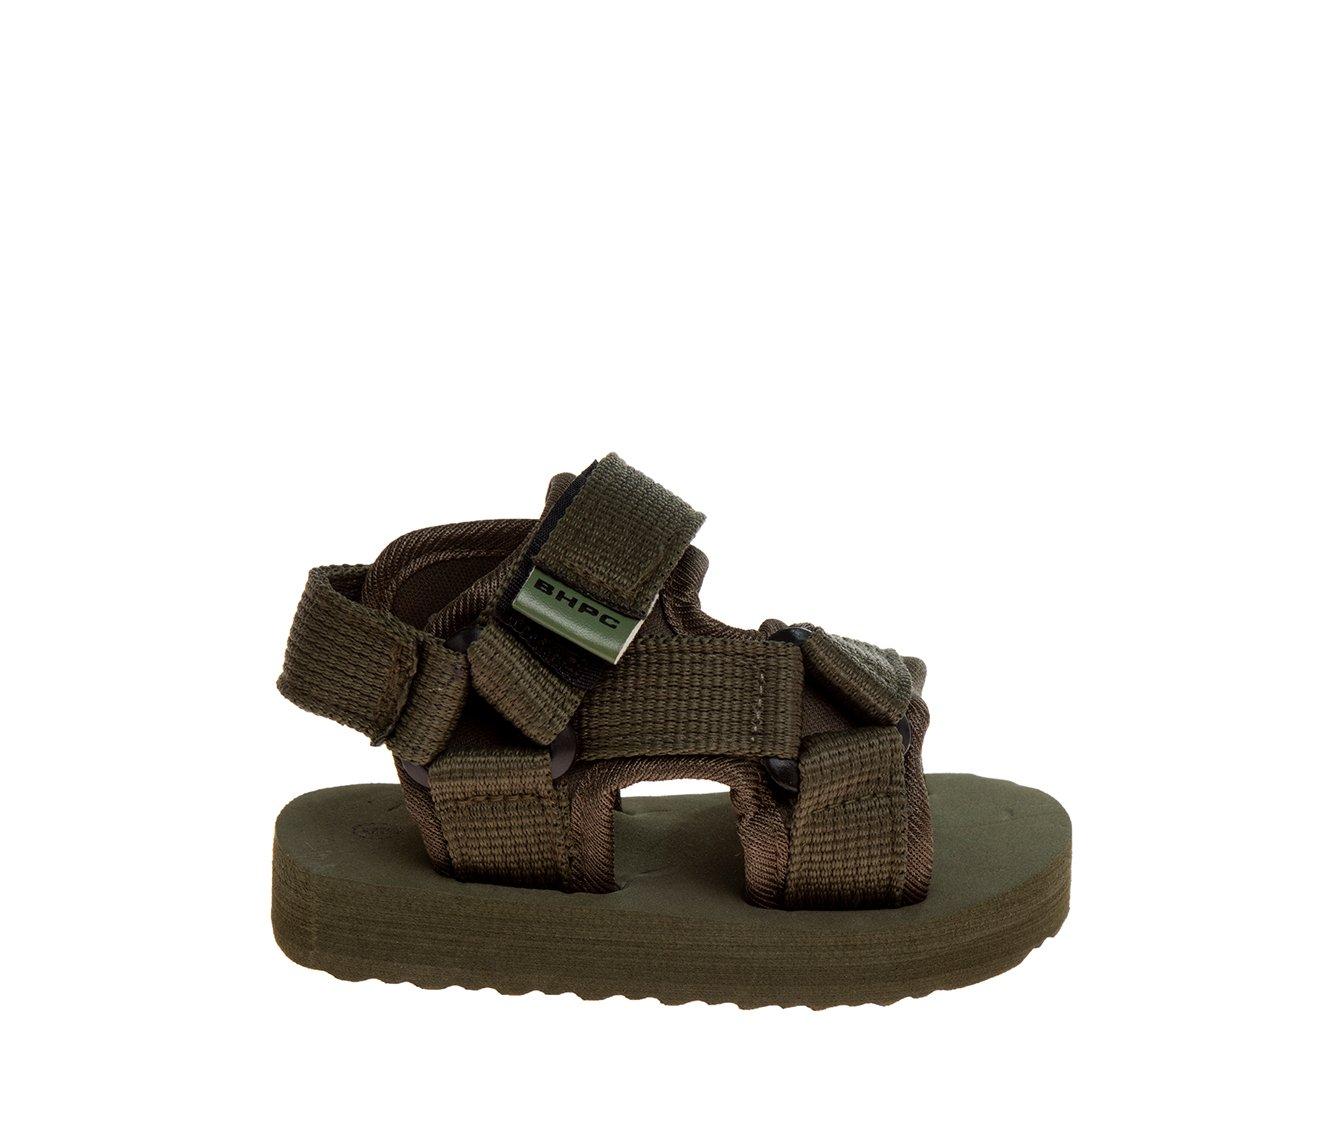 Boys' Beverly Hills Polo Club Toddler Winder Sport Sandals